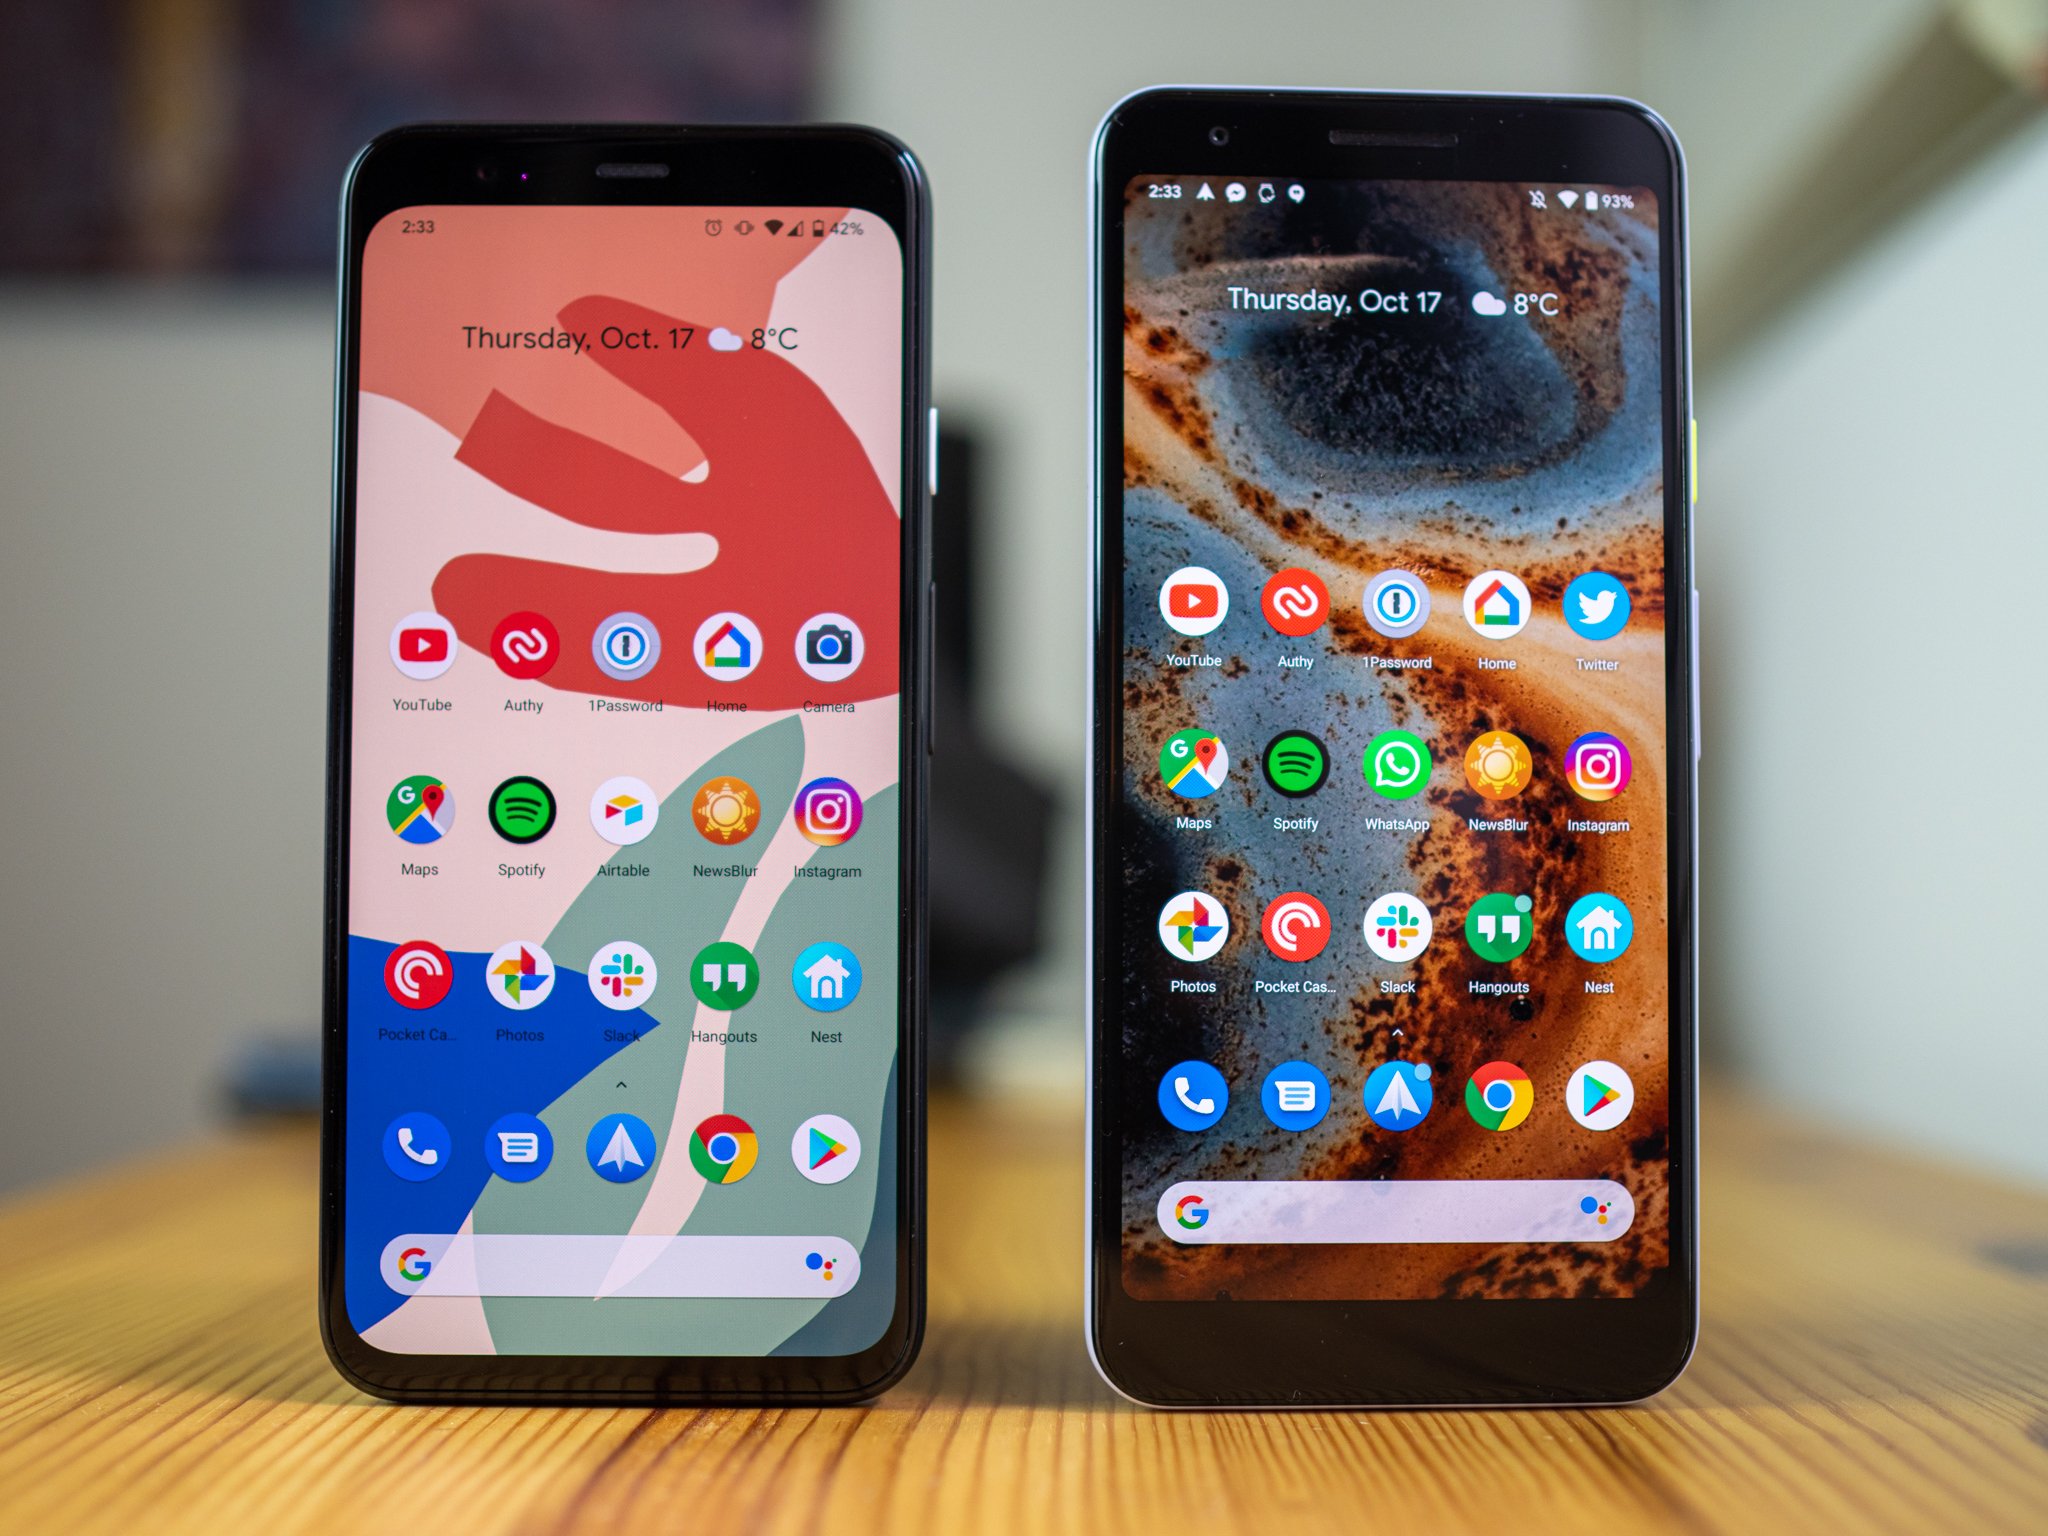 Pixel 4 and Pixel 3a